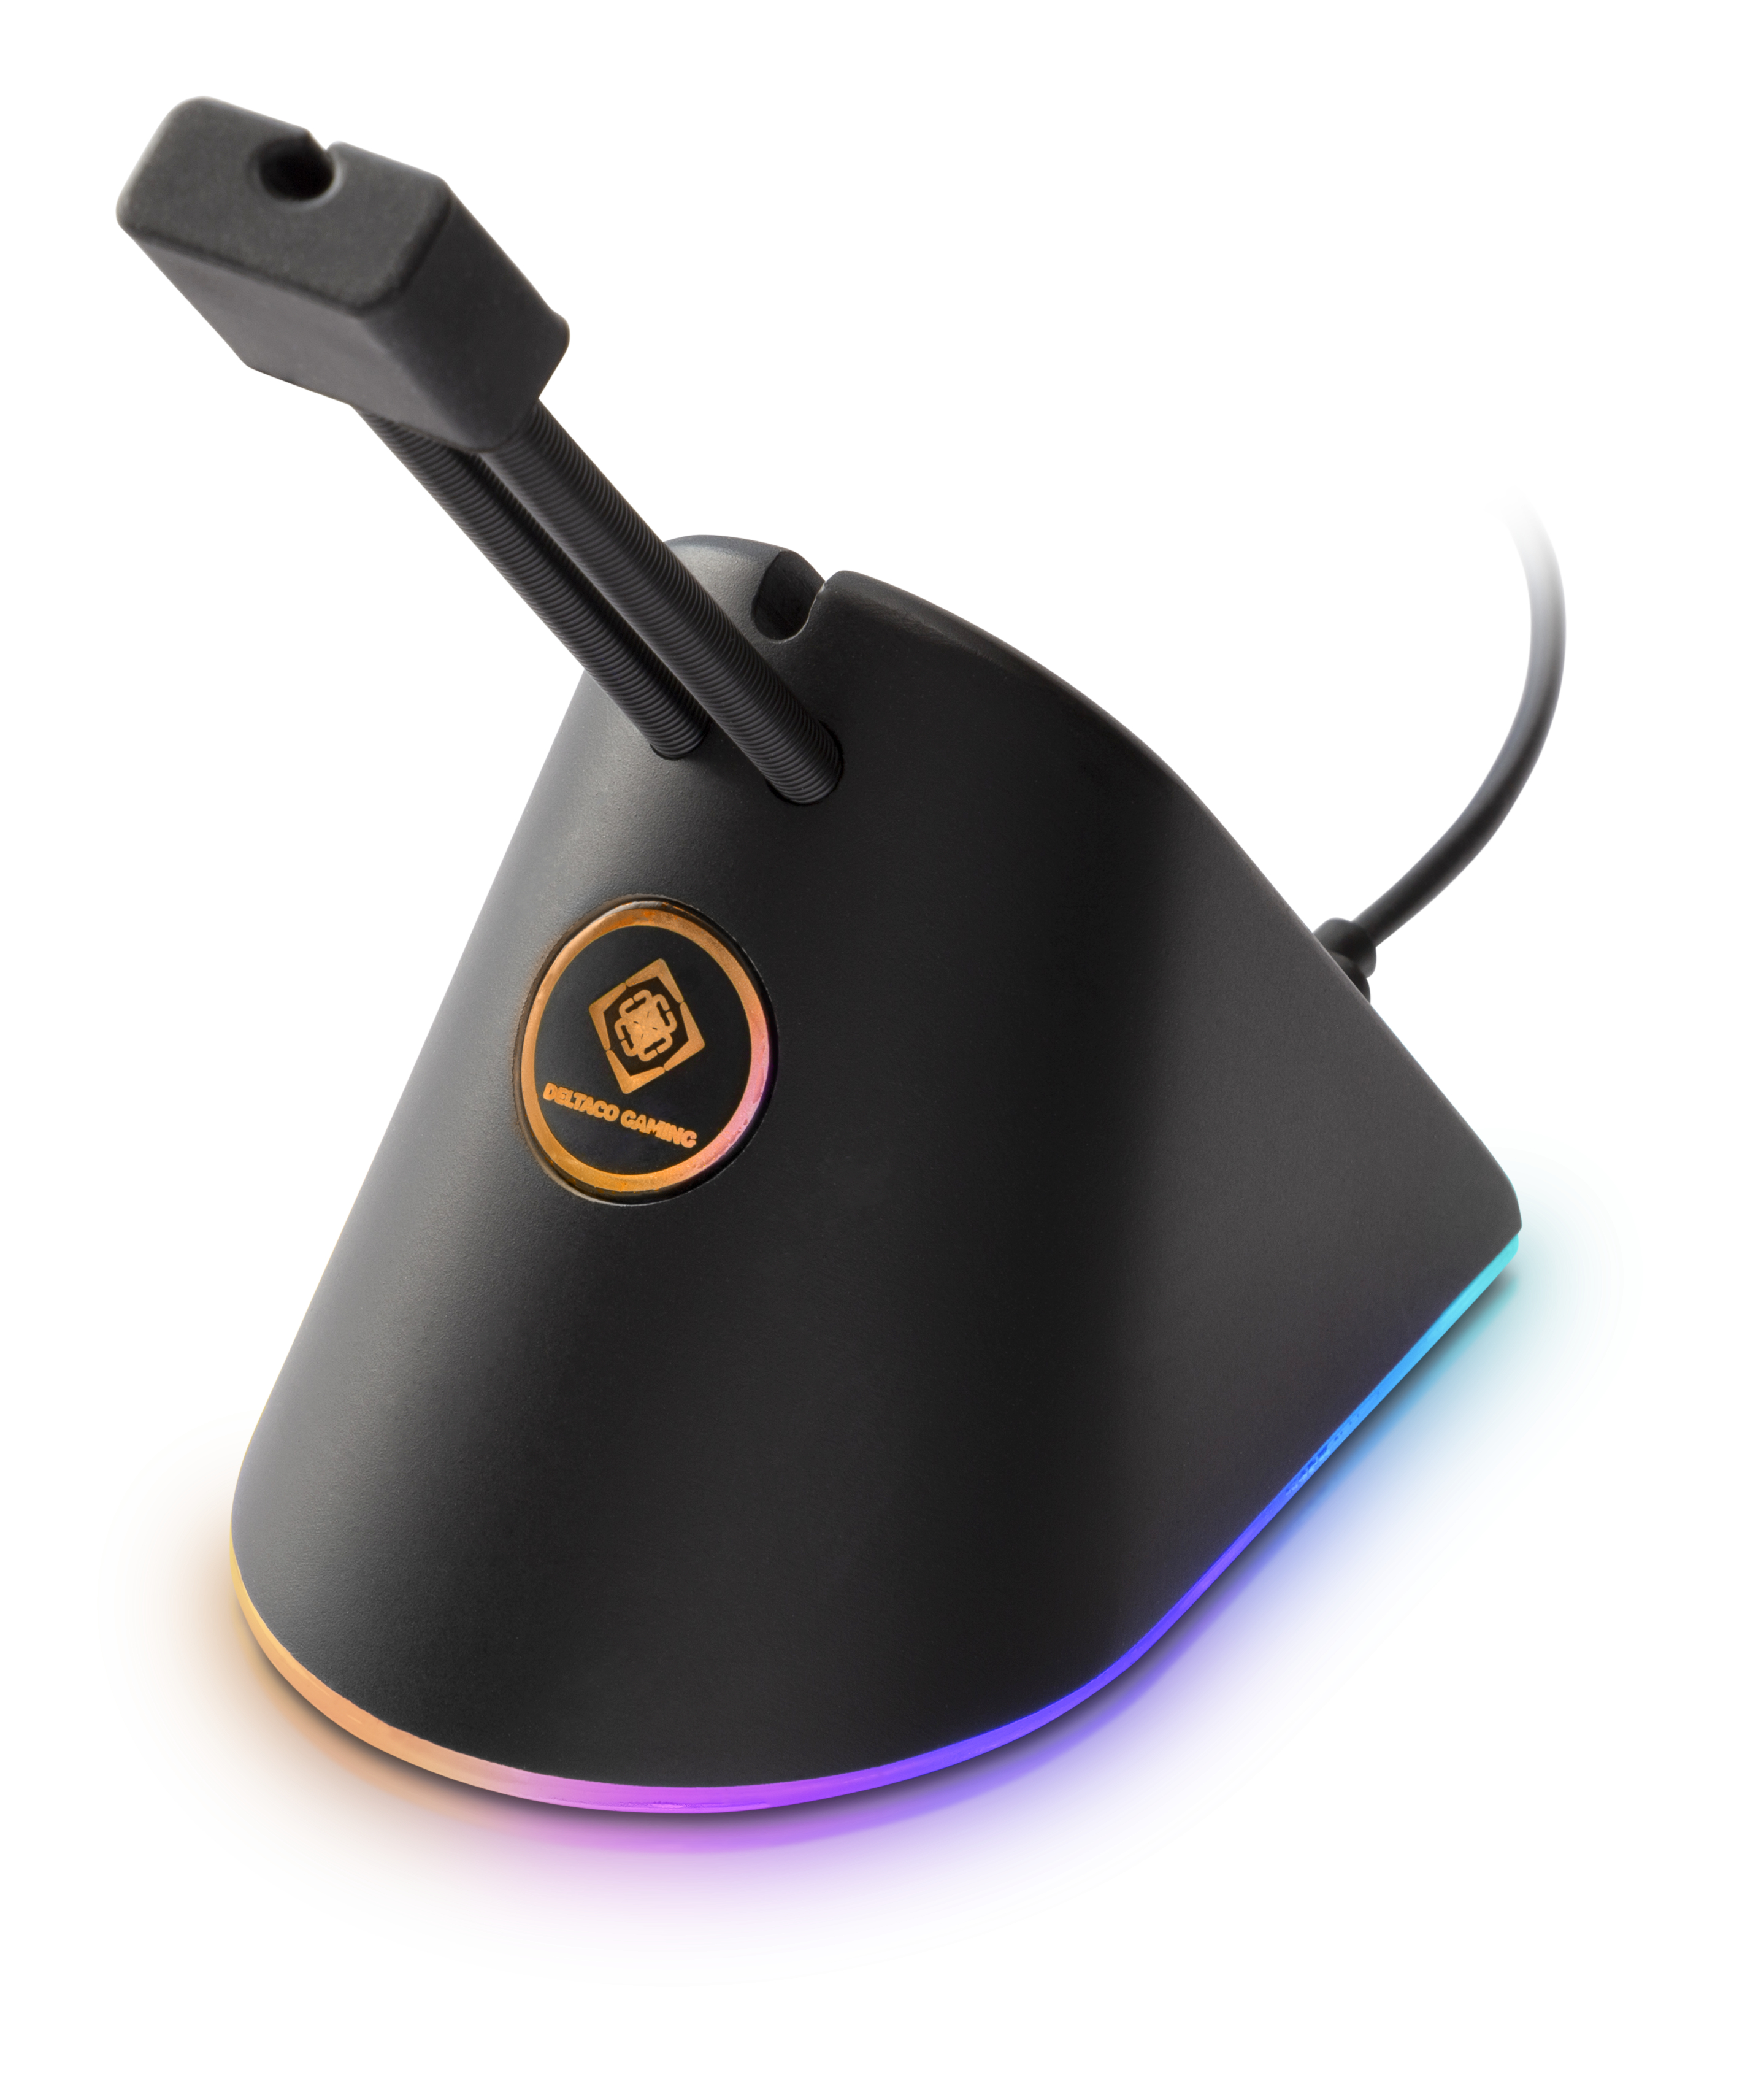 DELTACO Gaming Mouse Bungee, RGB GAM-044-RGB Black